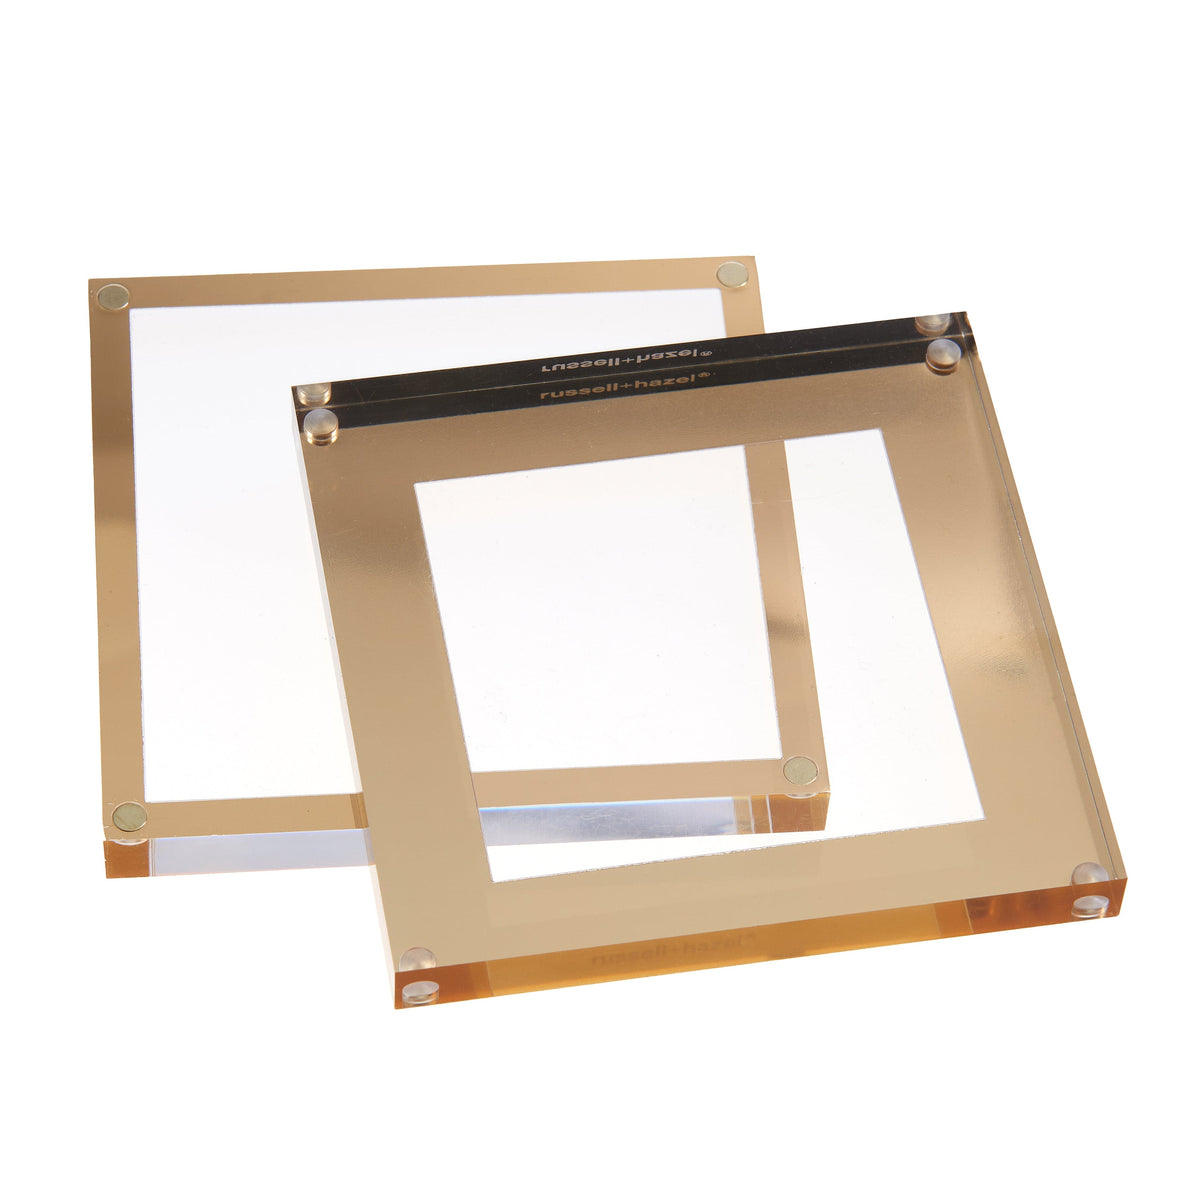 Acrylic + Gold Picture Frame - 4 x 4 inches 49779 russell+hazel Acrylic Organization